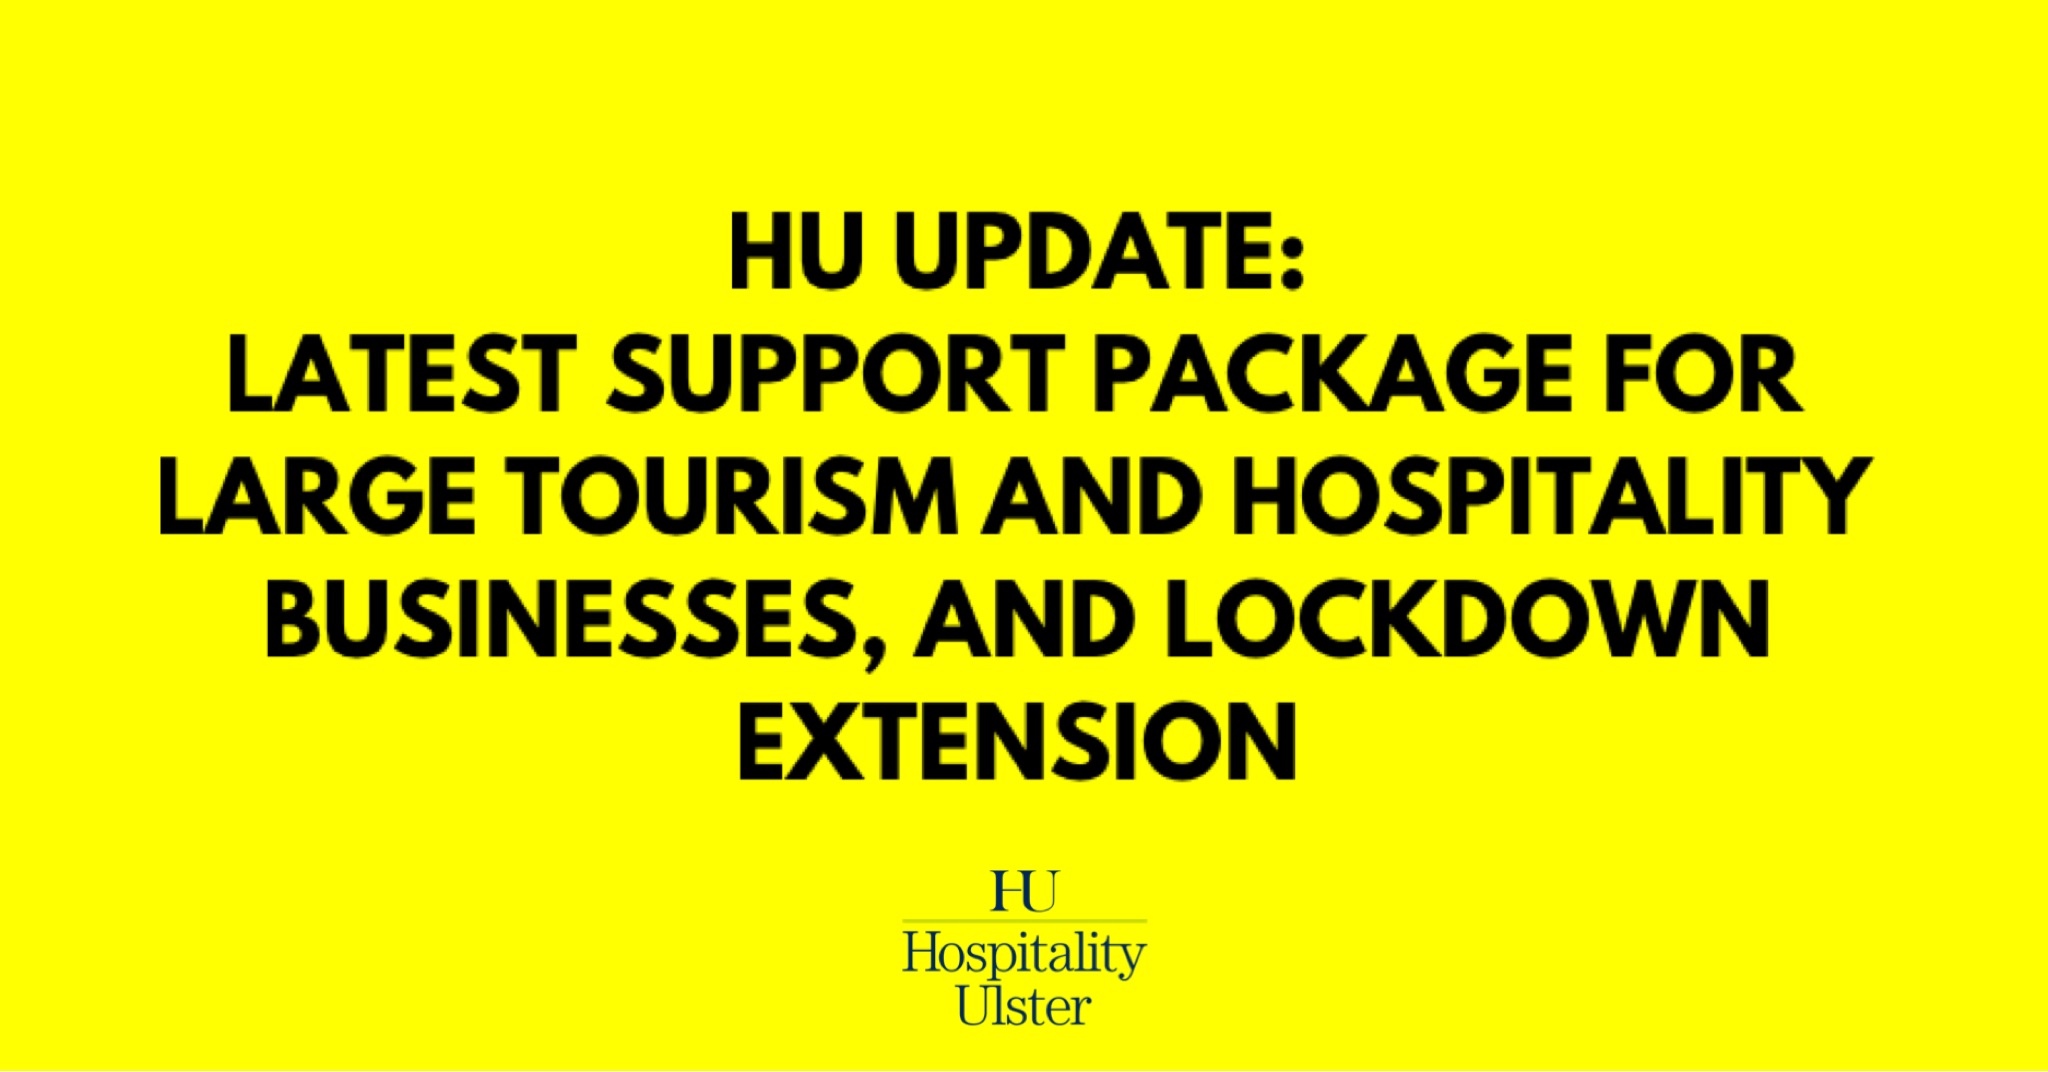 HU UPDATE - LATEST SUPPORT PACKAGE FOR LARGE TOURISM AND HOSPITALITY BUSINESSES - LOCKDOWN EXTENSION